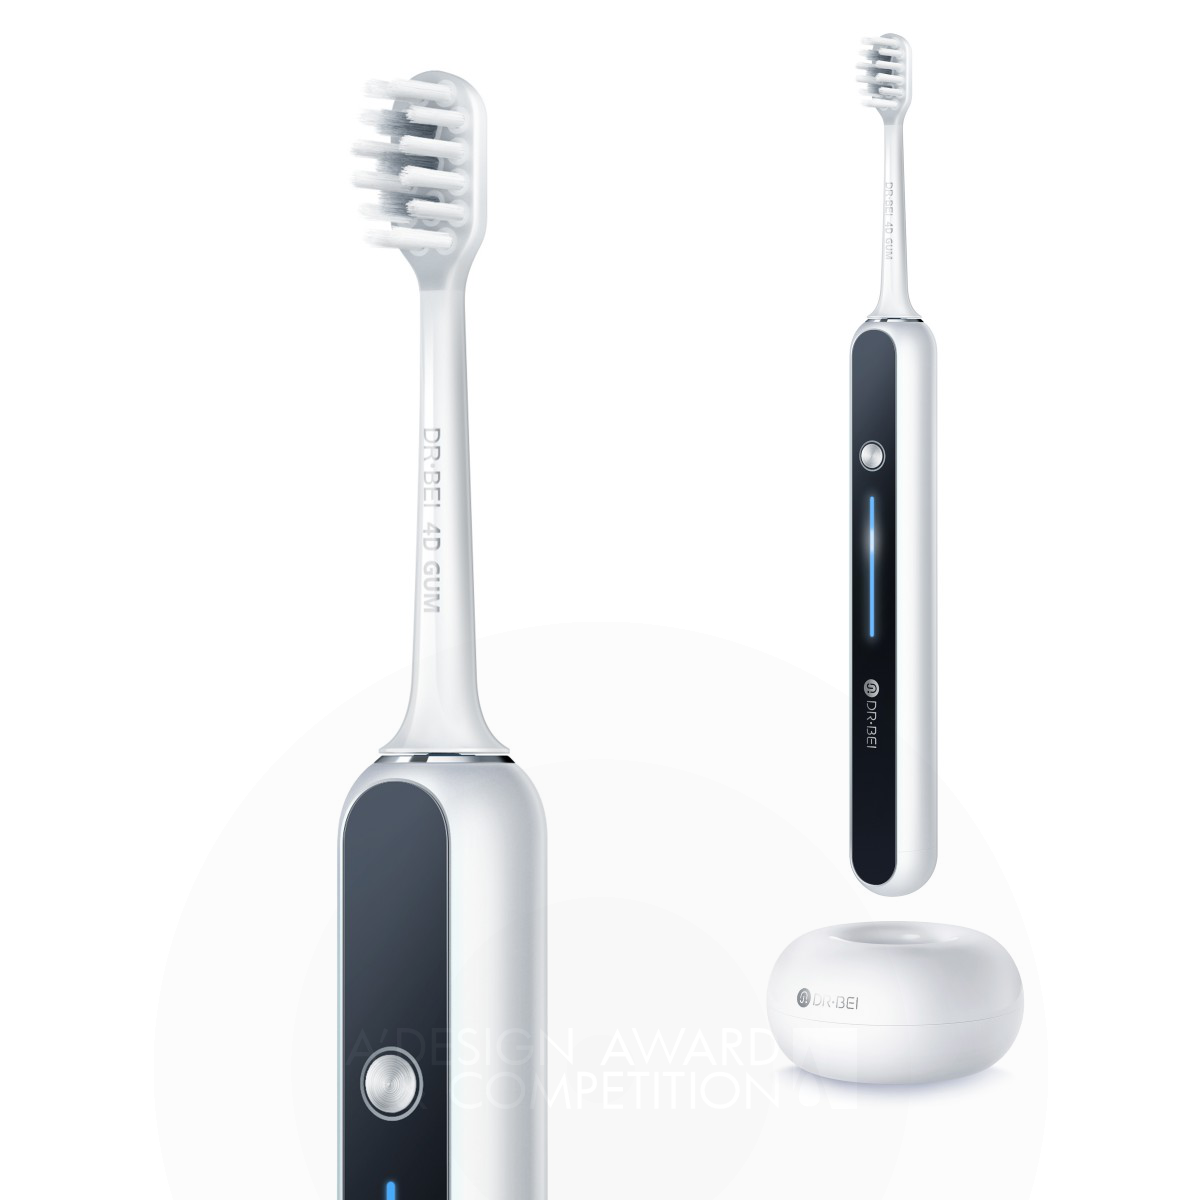 Dr.Bei S7 Sonic Electric Toothbrush by DR.BEI